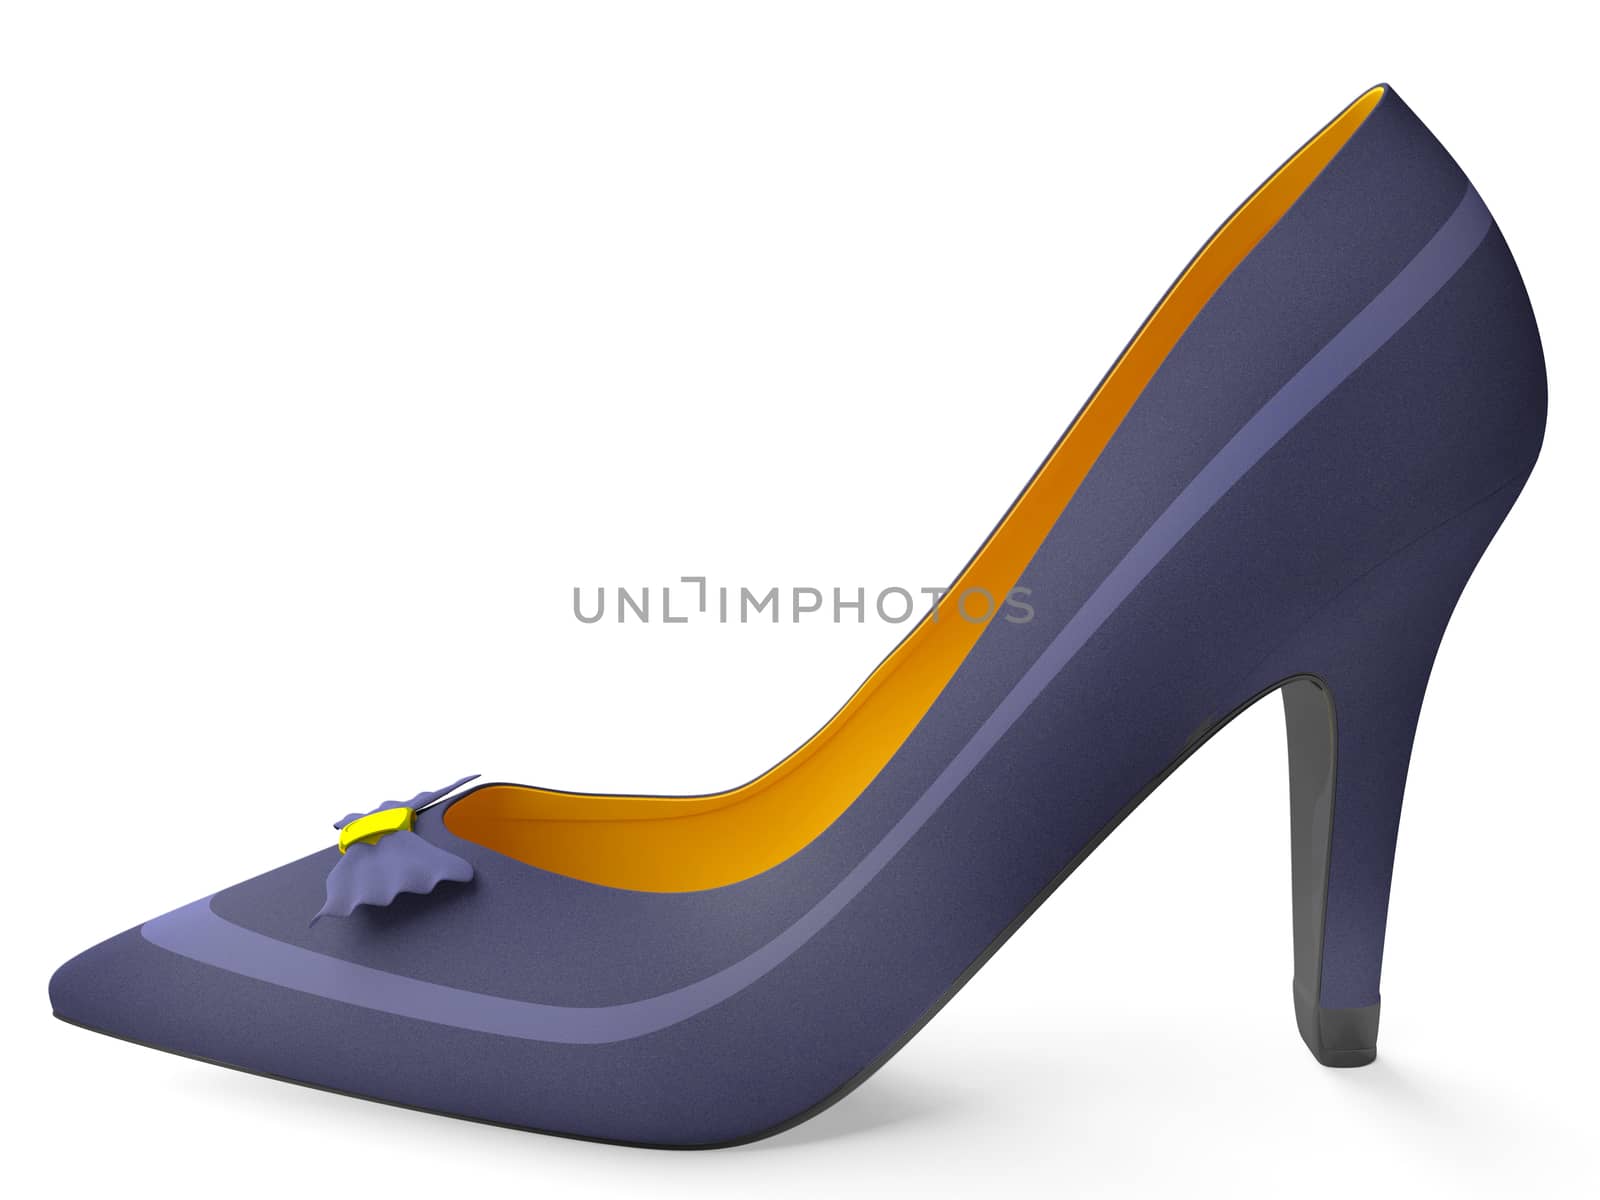 Classical female shoes on a high heel 3d